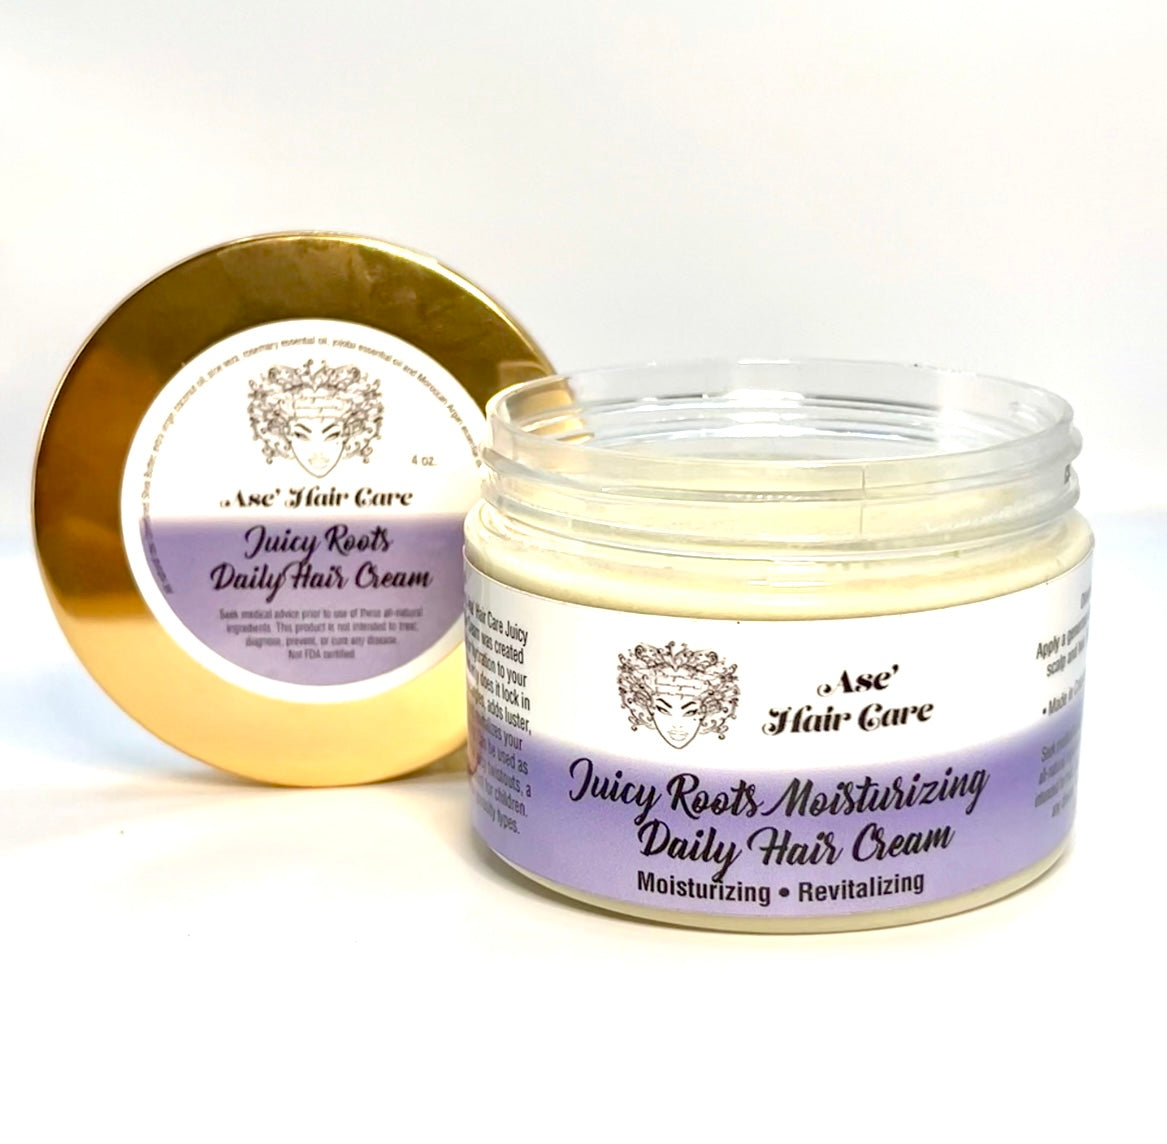 Simple all natural Ase’ Hair Care Juicy Roots Daily Hair Cream was created to provide superior hydration to your beautiful coils. Not only does it lock in moisture, but it detangles, adds luster, aids in growth and revitalizes your hair from root to tip!